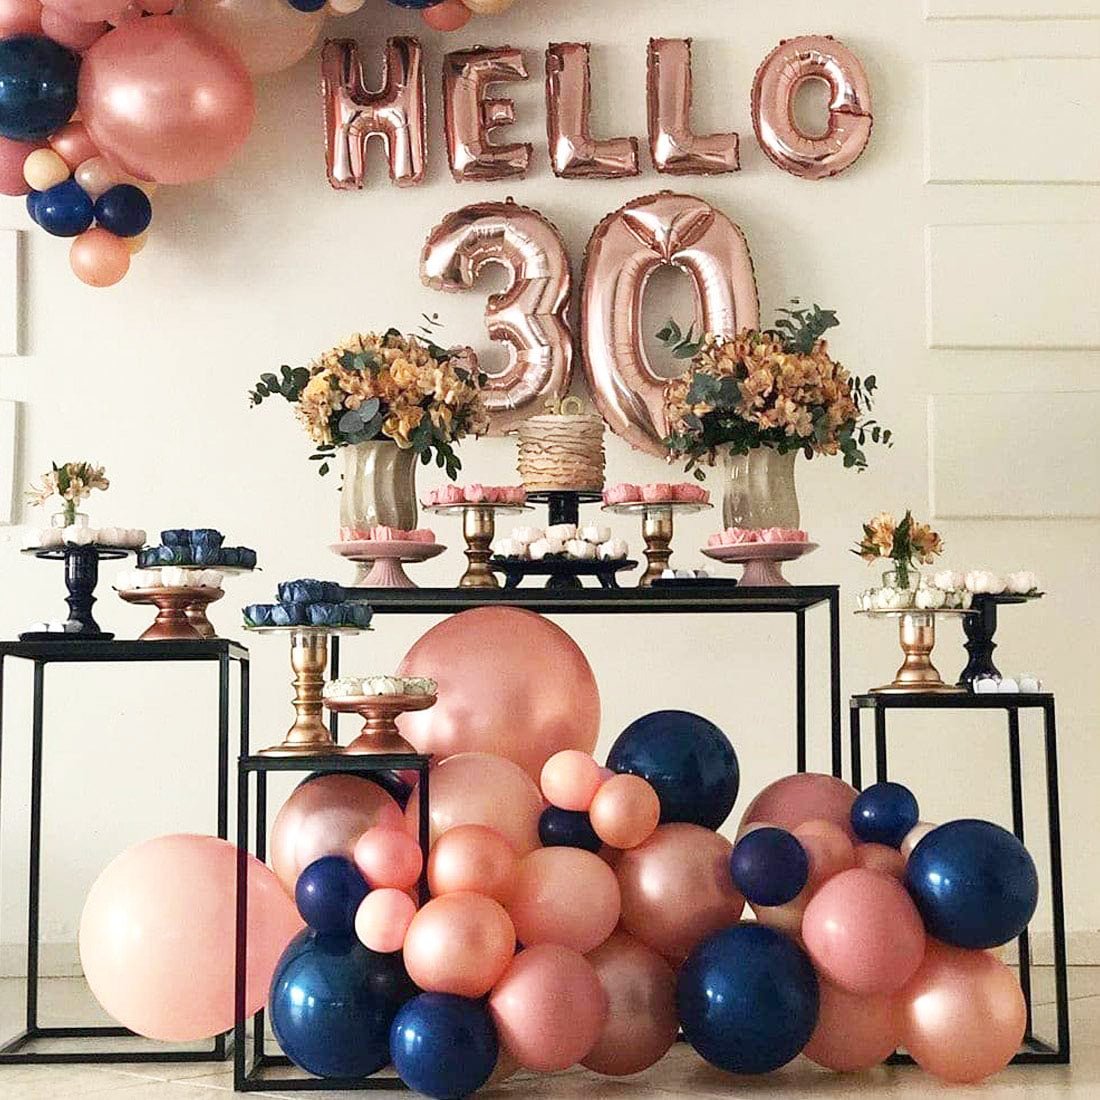 What Balloon Colors Look Good Together? - Ellie's Party Supply